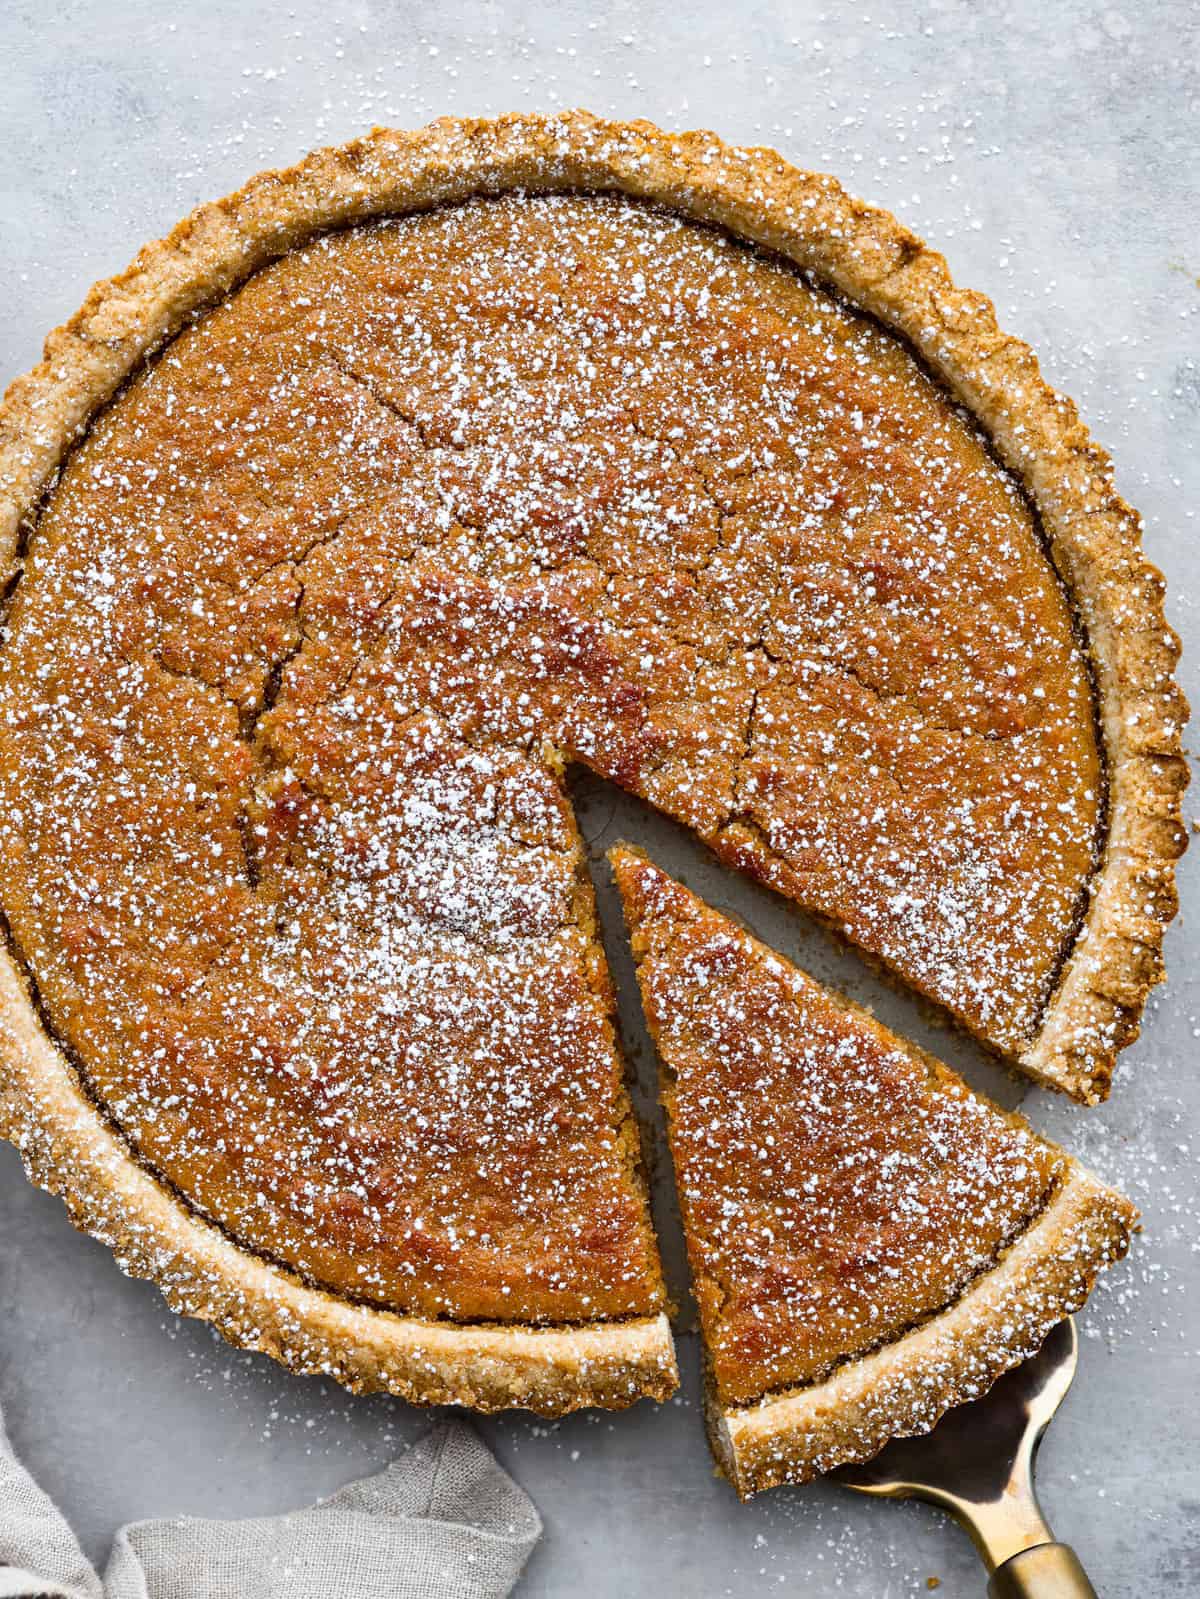 Treacle tart with a slice being lifted out of the tart with a pie scoop.